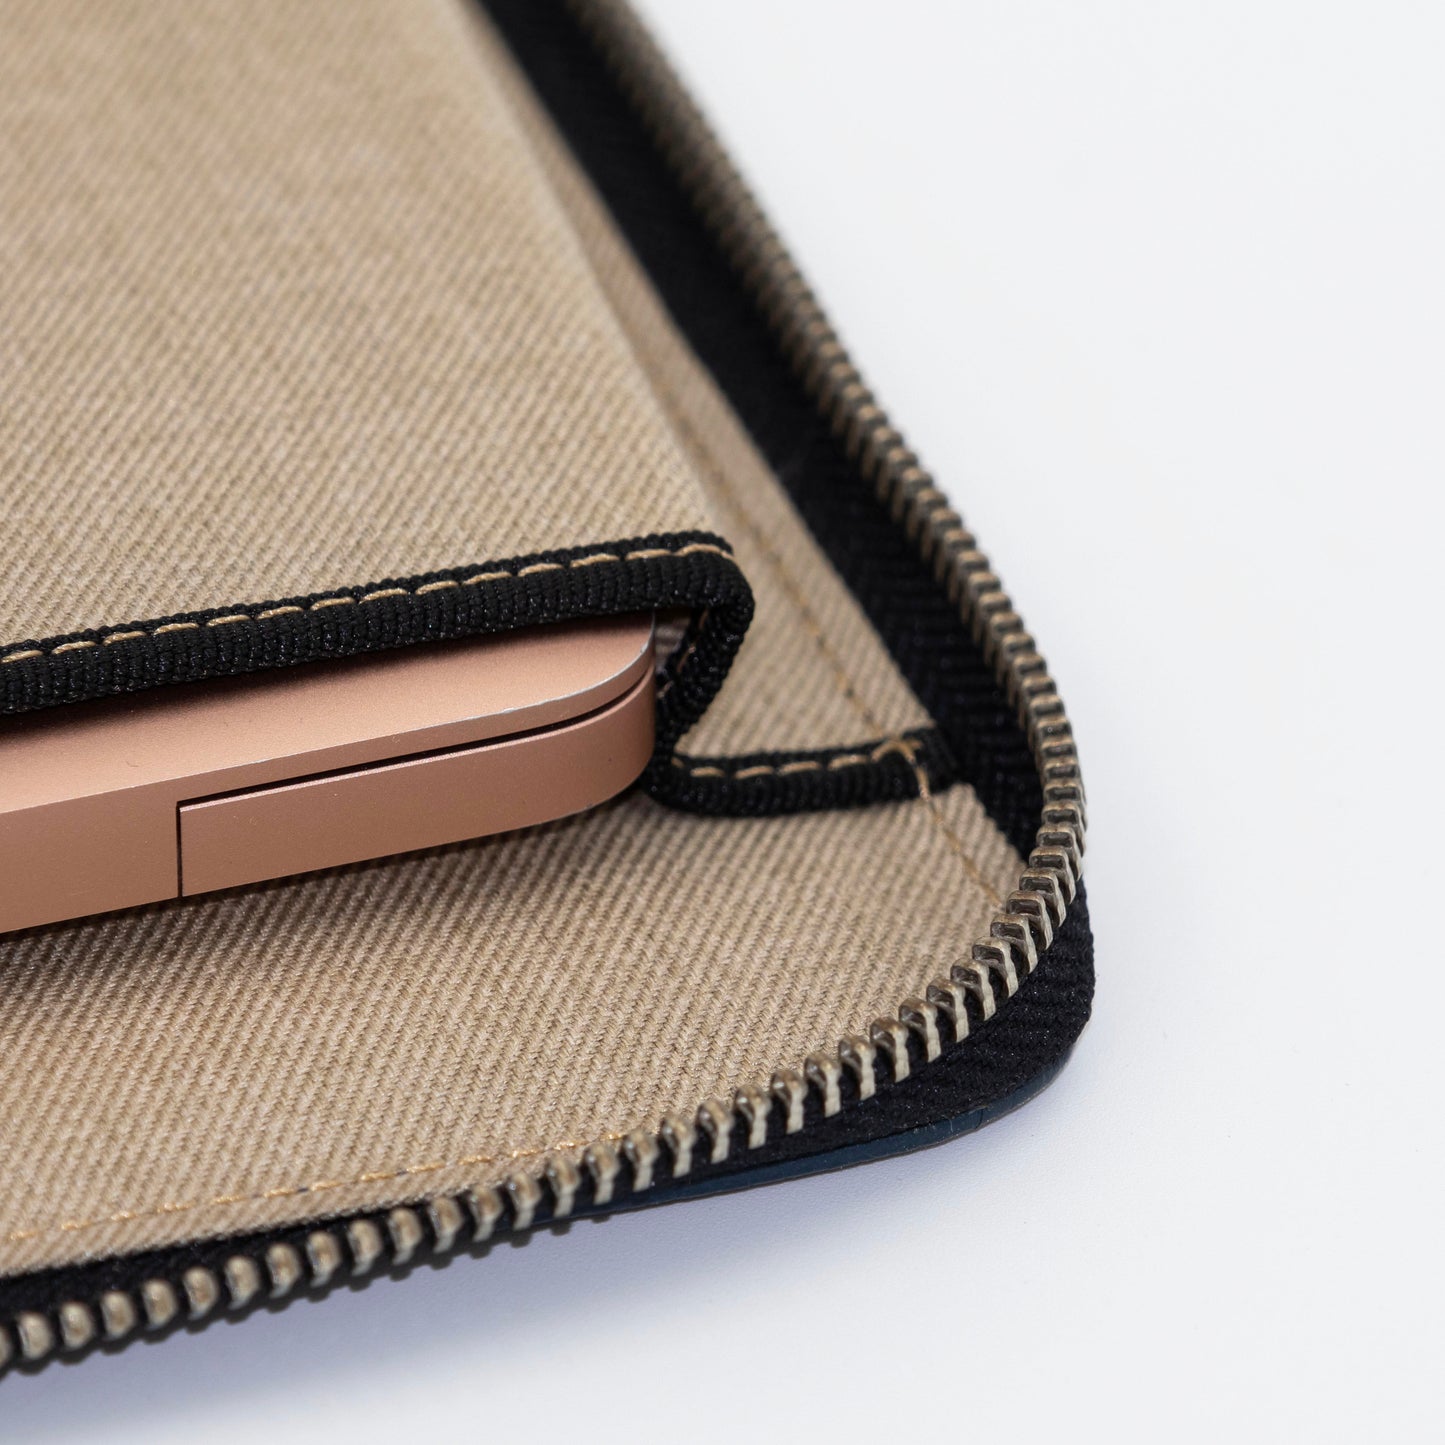  Featuring a gusseted compartment for effortless access. Ensures that zippers never come into contact with your laptop